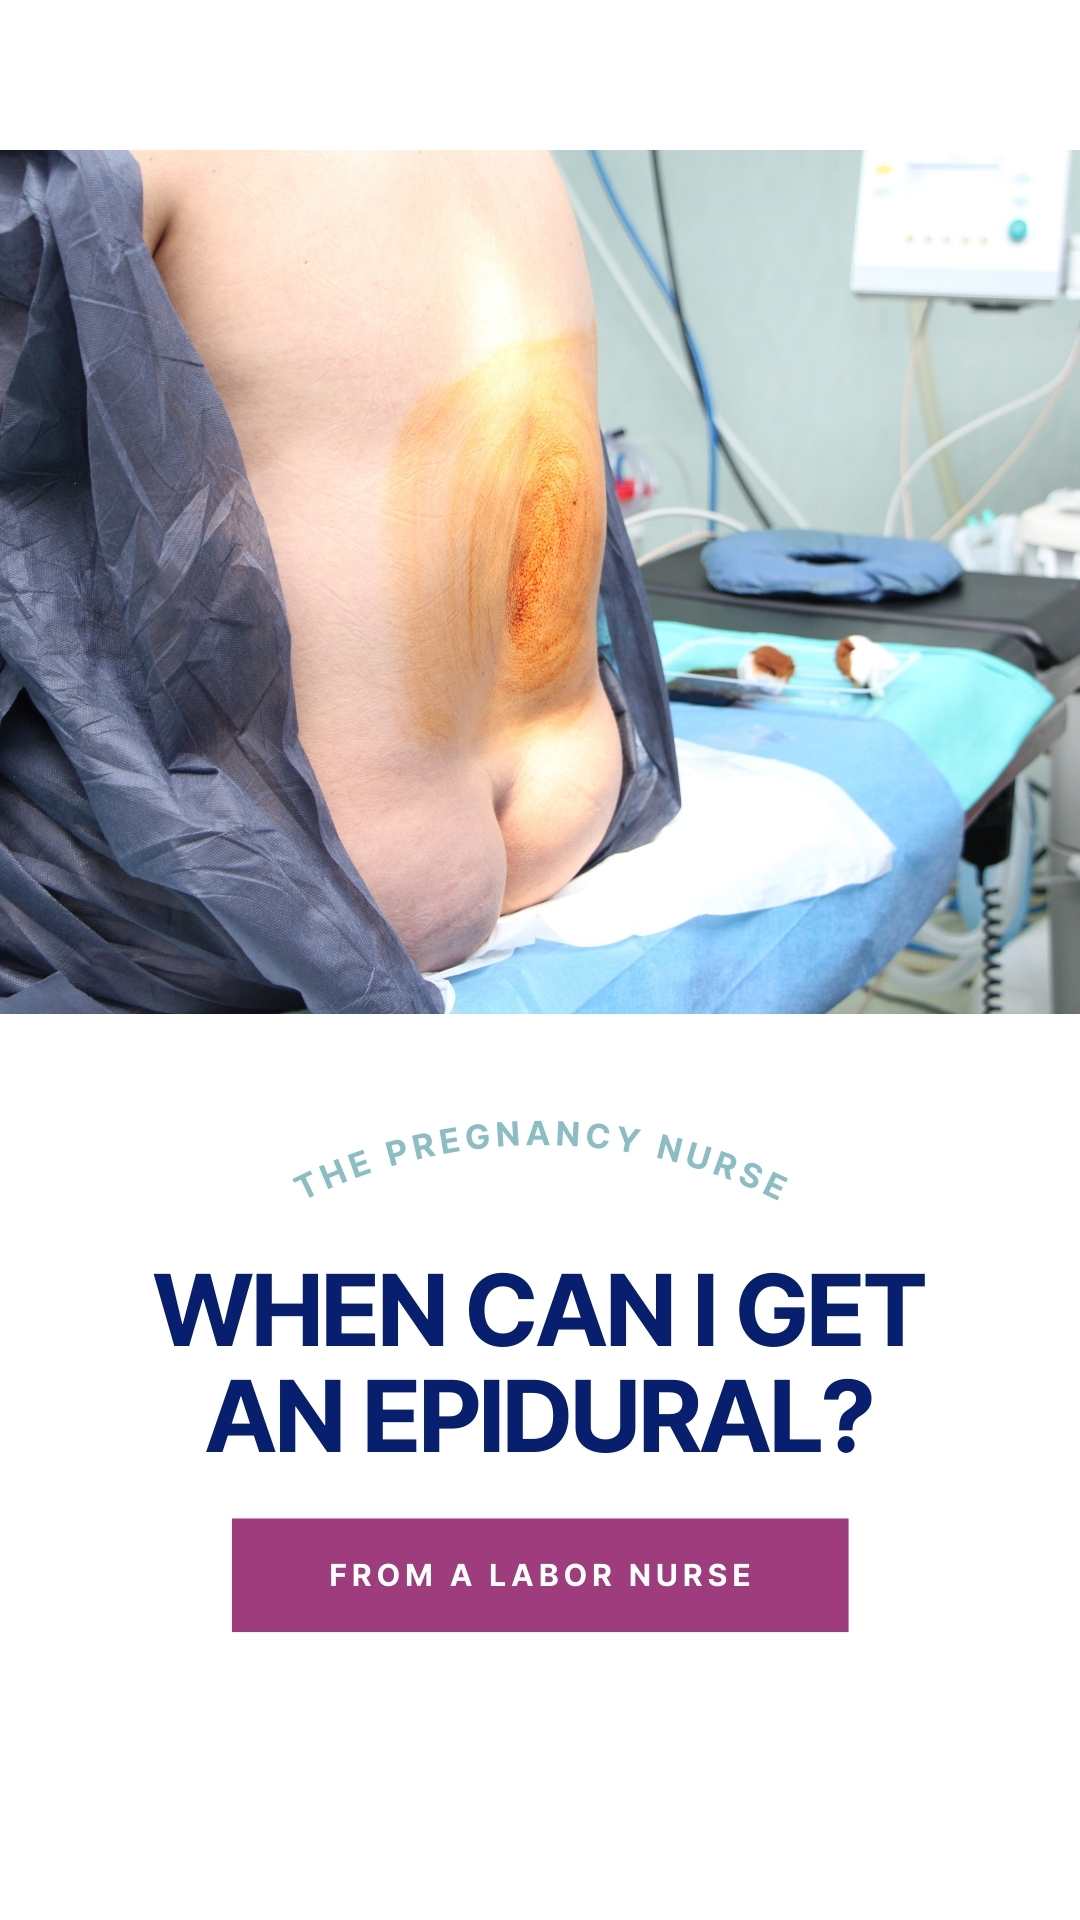 lower back epidural needle epidural catheter spinal cord pain medication epidural space local anesthetic epidural block pain medicine epidural anesthesia medical conditions small tube lower body epidural analgesia pain management birth plan